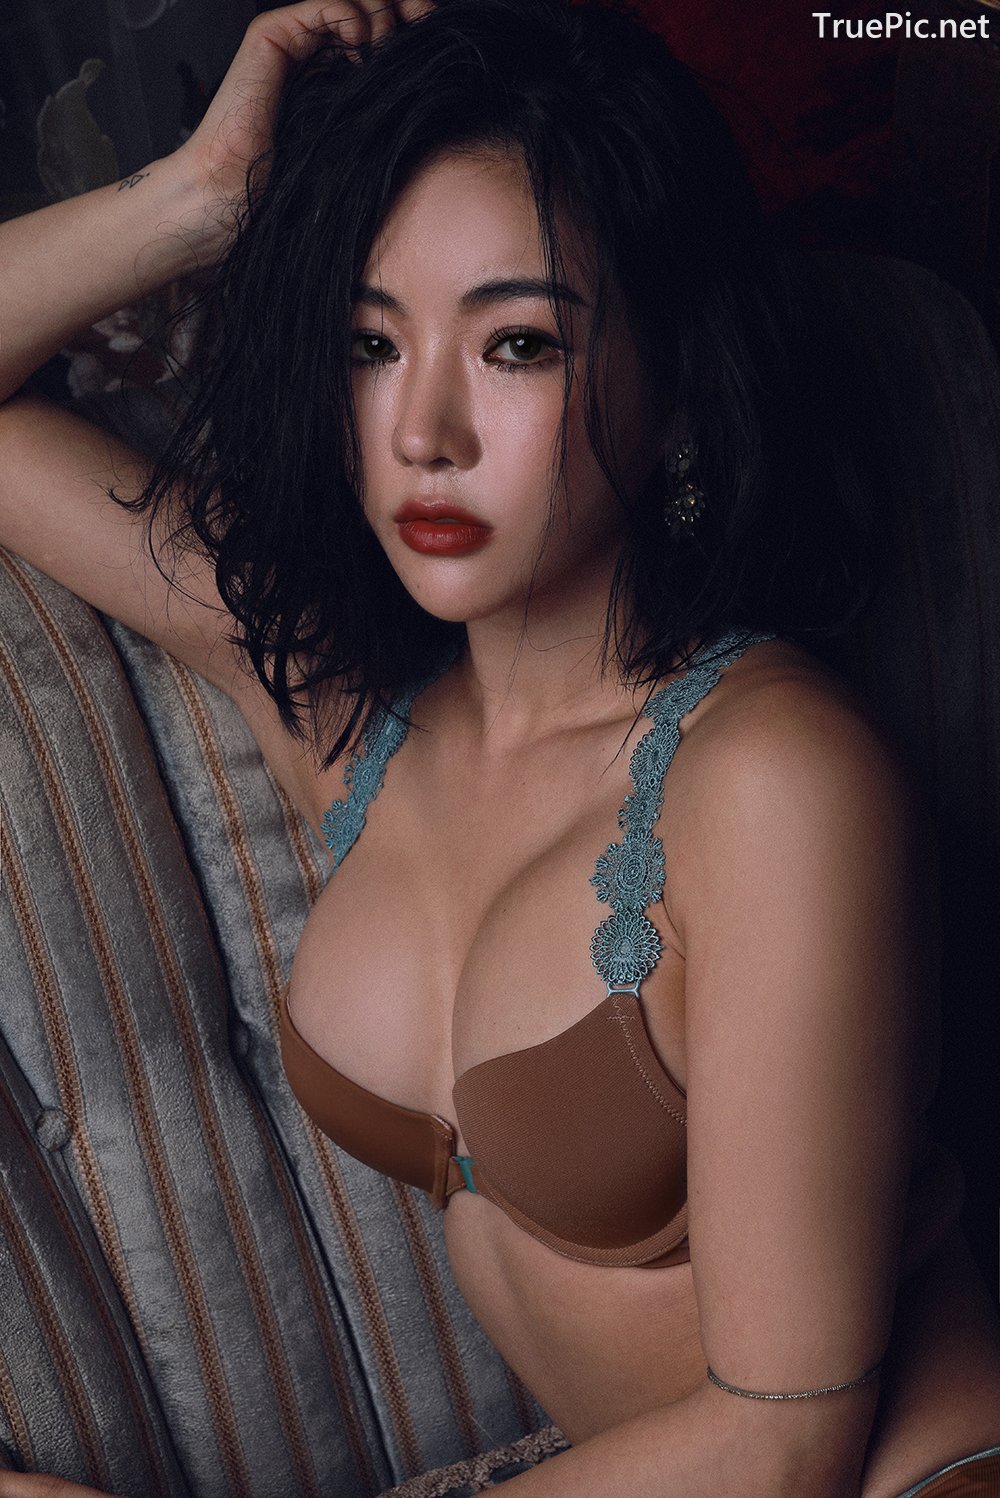 Image-An-Seo-Rin-Brown-and-Red-Lingerie-Korean-Model-Fashion-TruePic.net- Picture-18